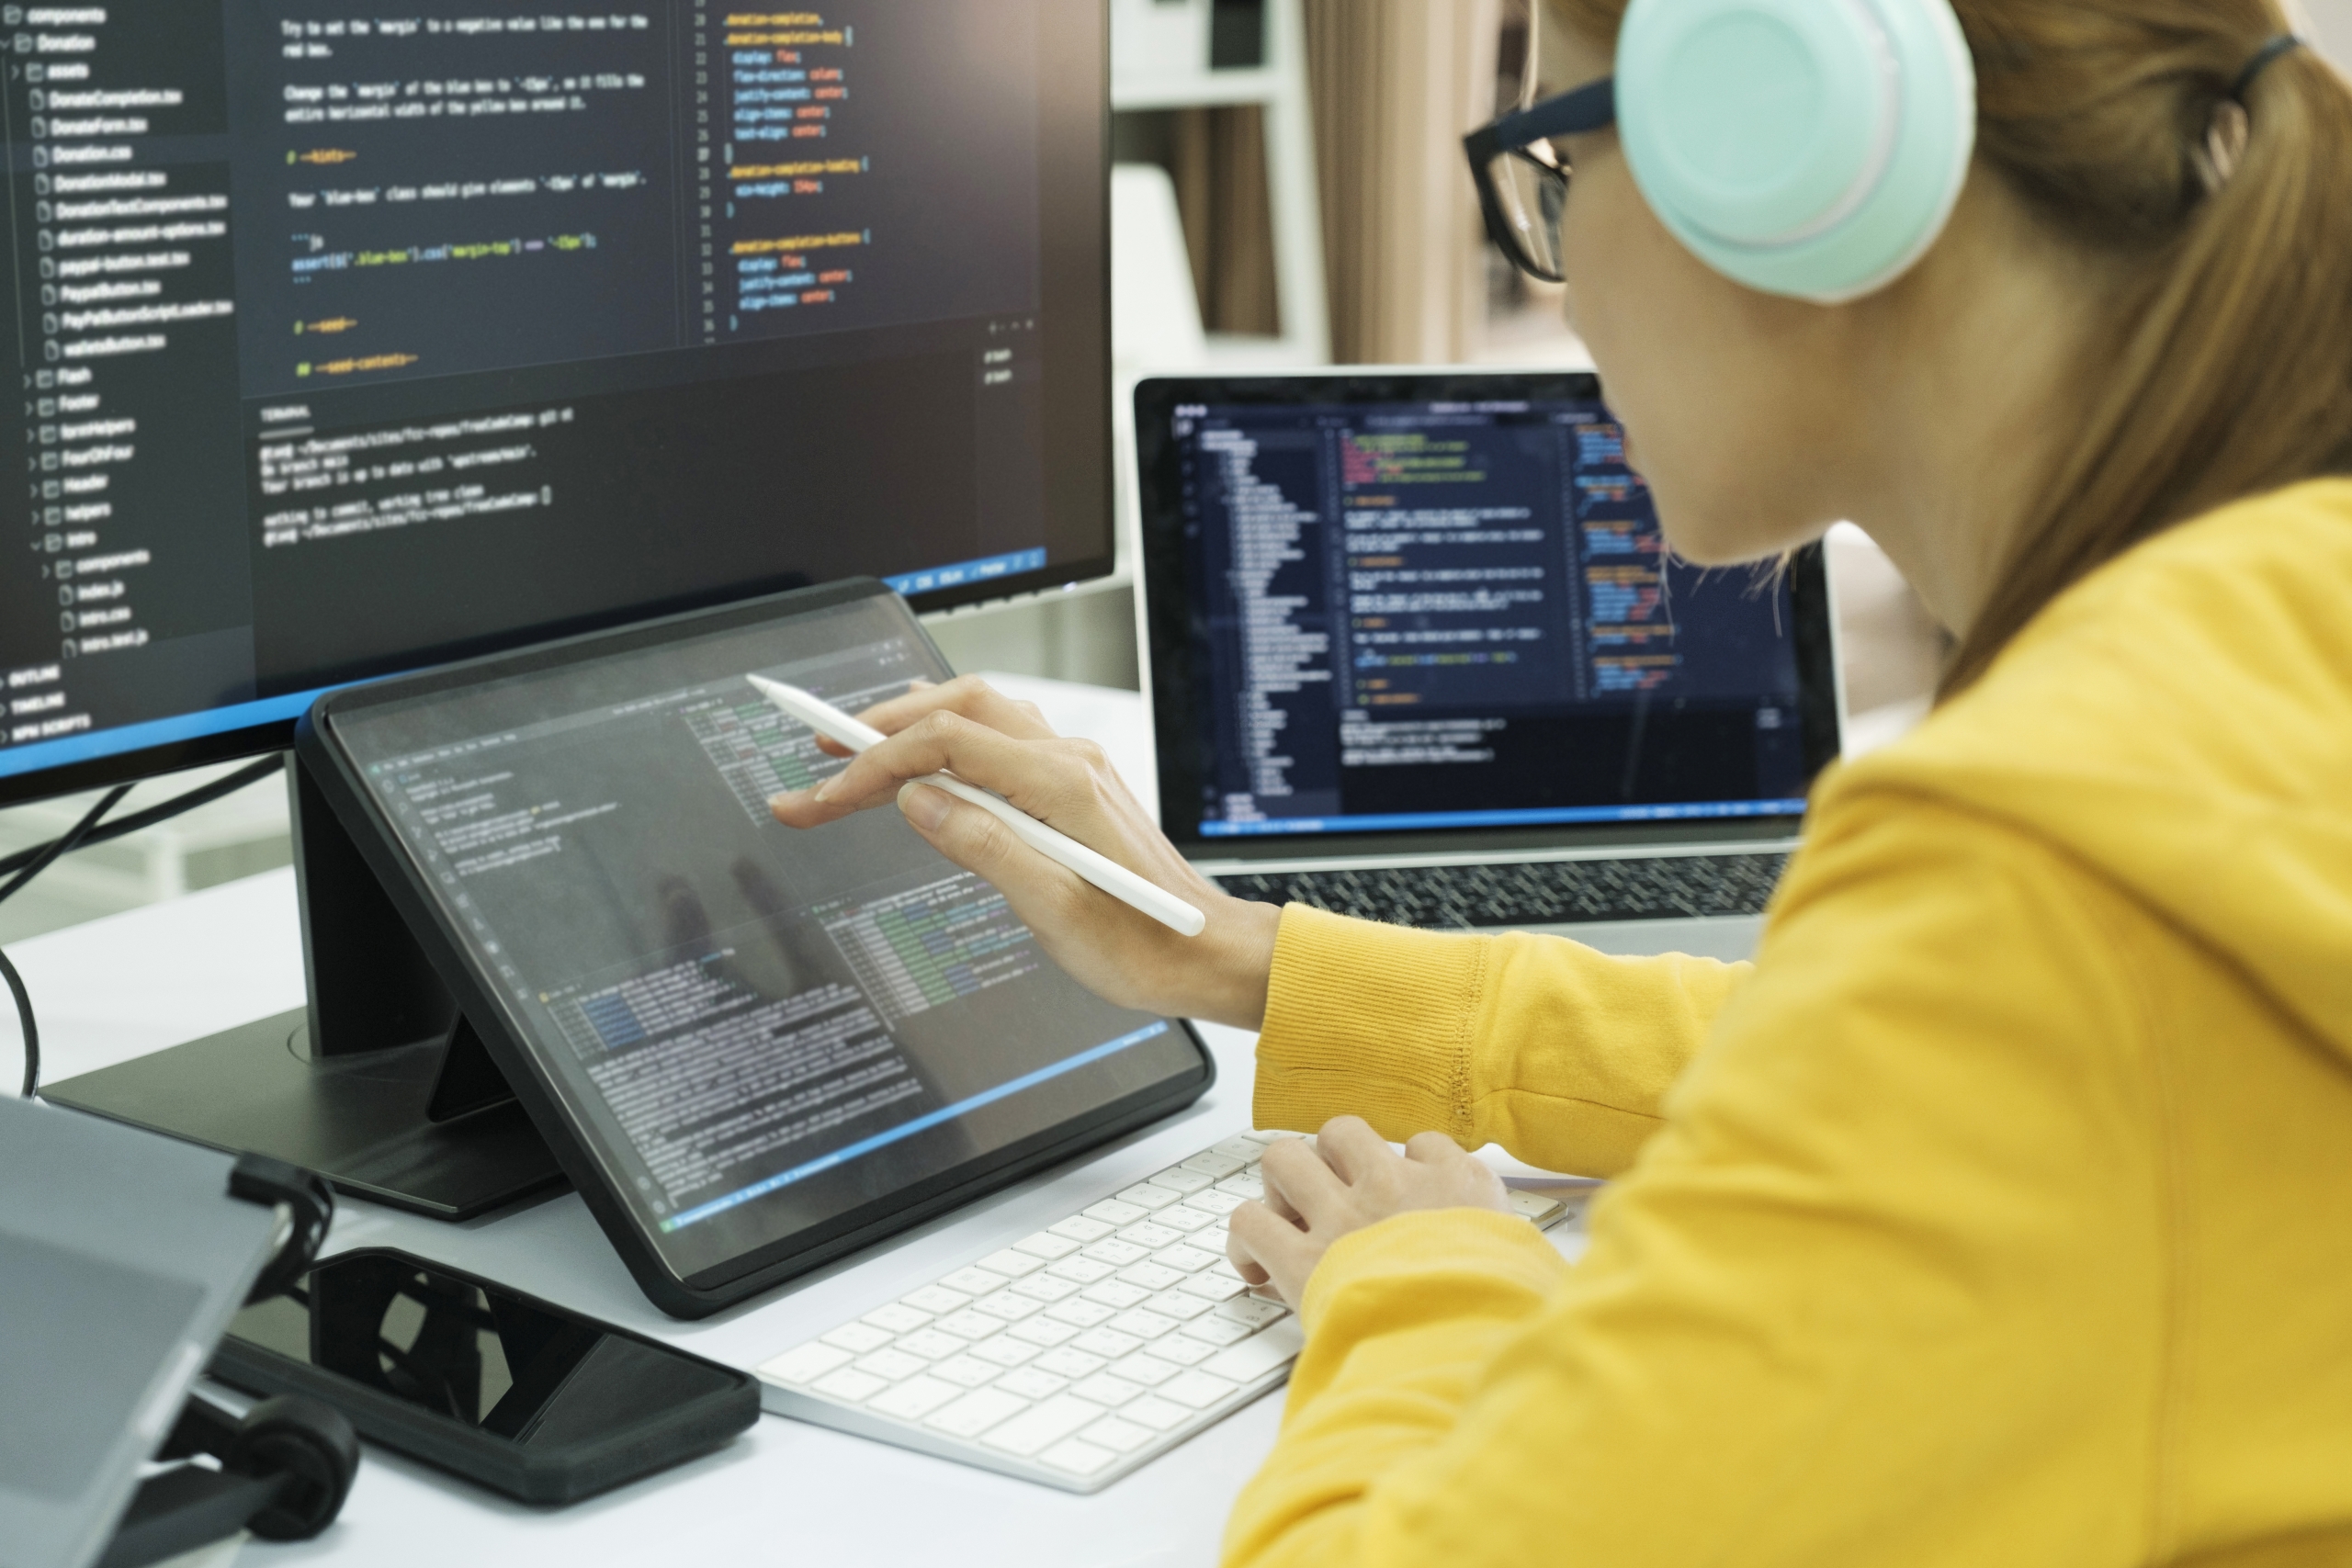 Instead of complex coding, low-code platforms embrace a software development approach requiring little or no coding to design and build apps and processes.